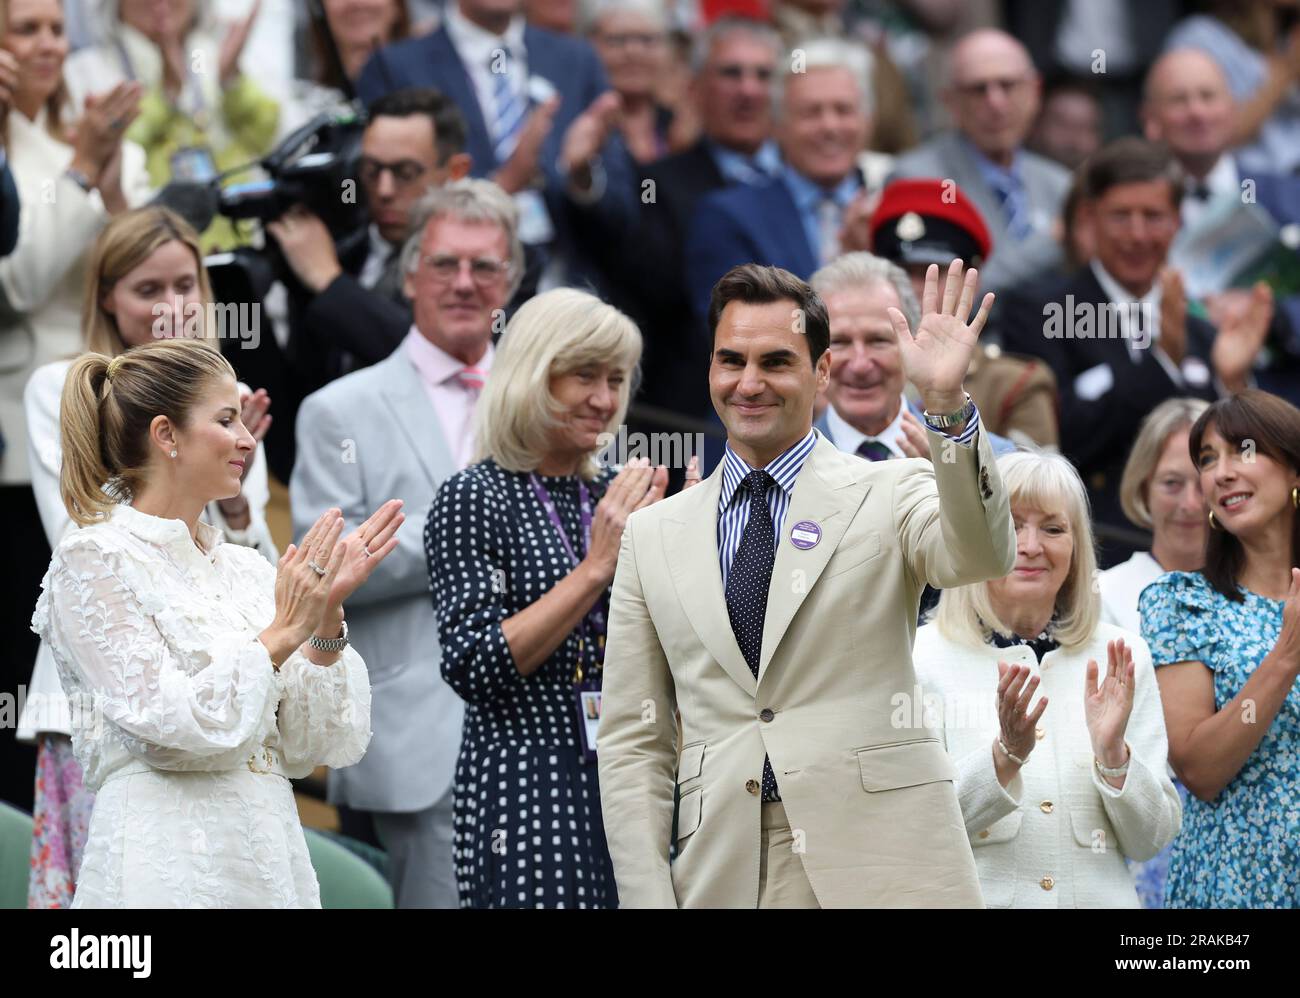 London, Britain. 4th July, 2023. Roger Federer (front R) waves to spectators at Centre Court ahead of play on Day 2 of Wimbledon Tennis Championships in London, Britain, July 4, 2023. Credit: Han Yan/Xinhua/Alamy Live News Stock Photo